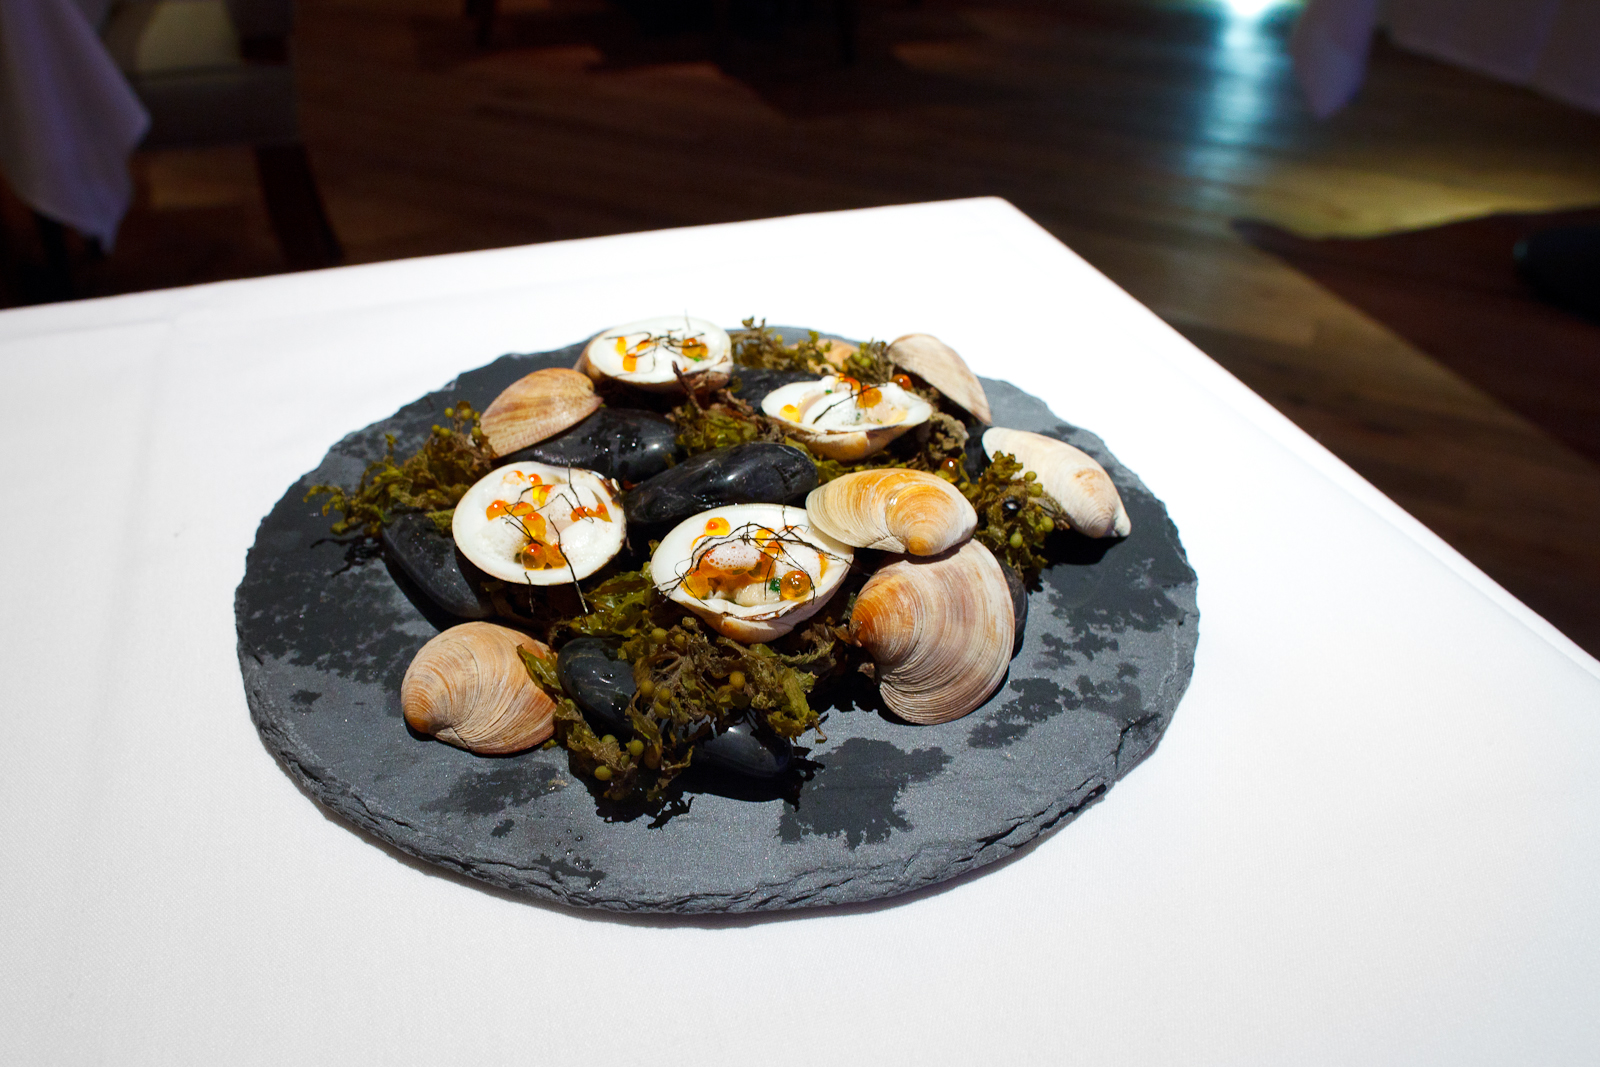 Snacks 4: Dave's clams, seaweed, fumet and smoked trout roe